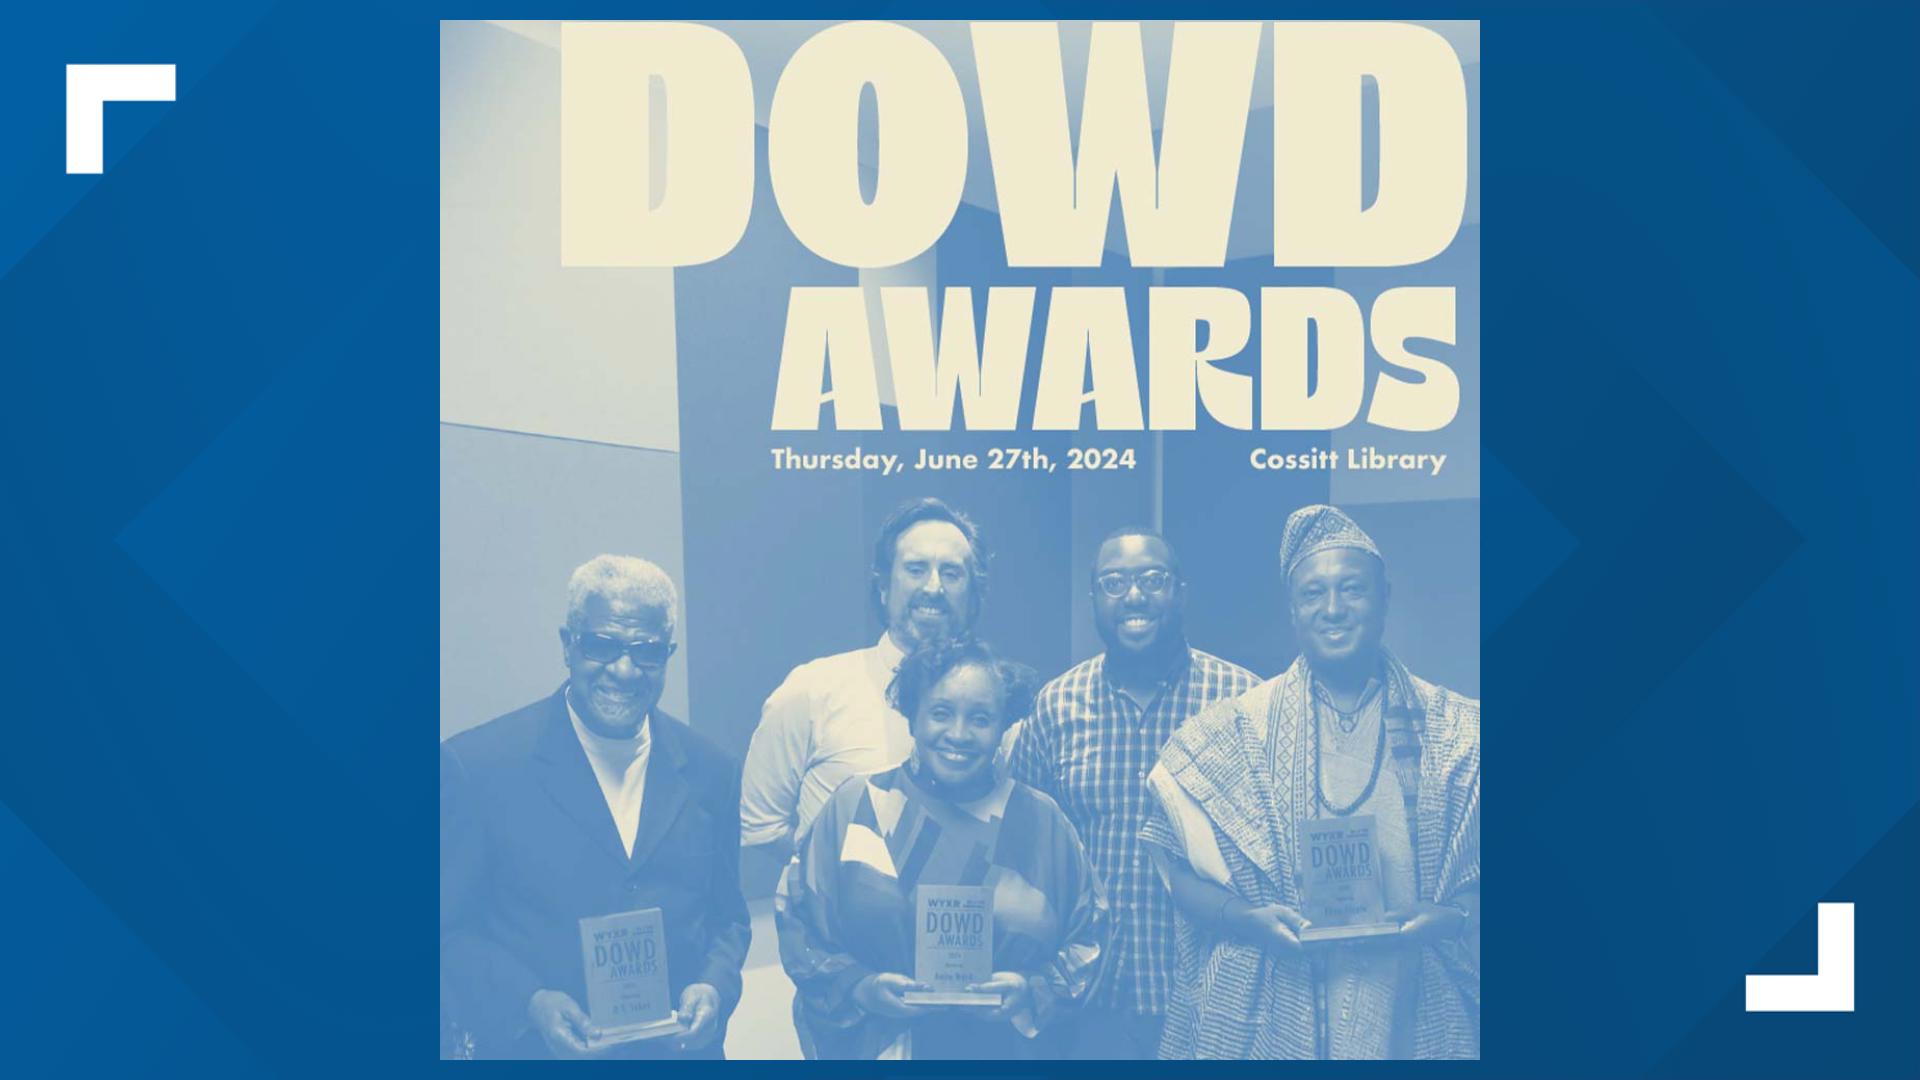 The DOWD awards recognize individuals whose contributions extend beyond musical excellence into the realms of community service and cultural enrichment.